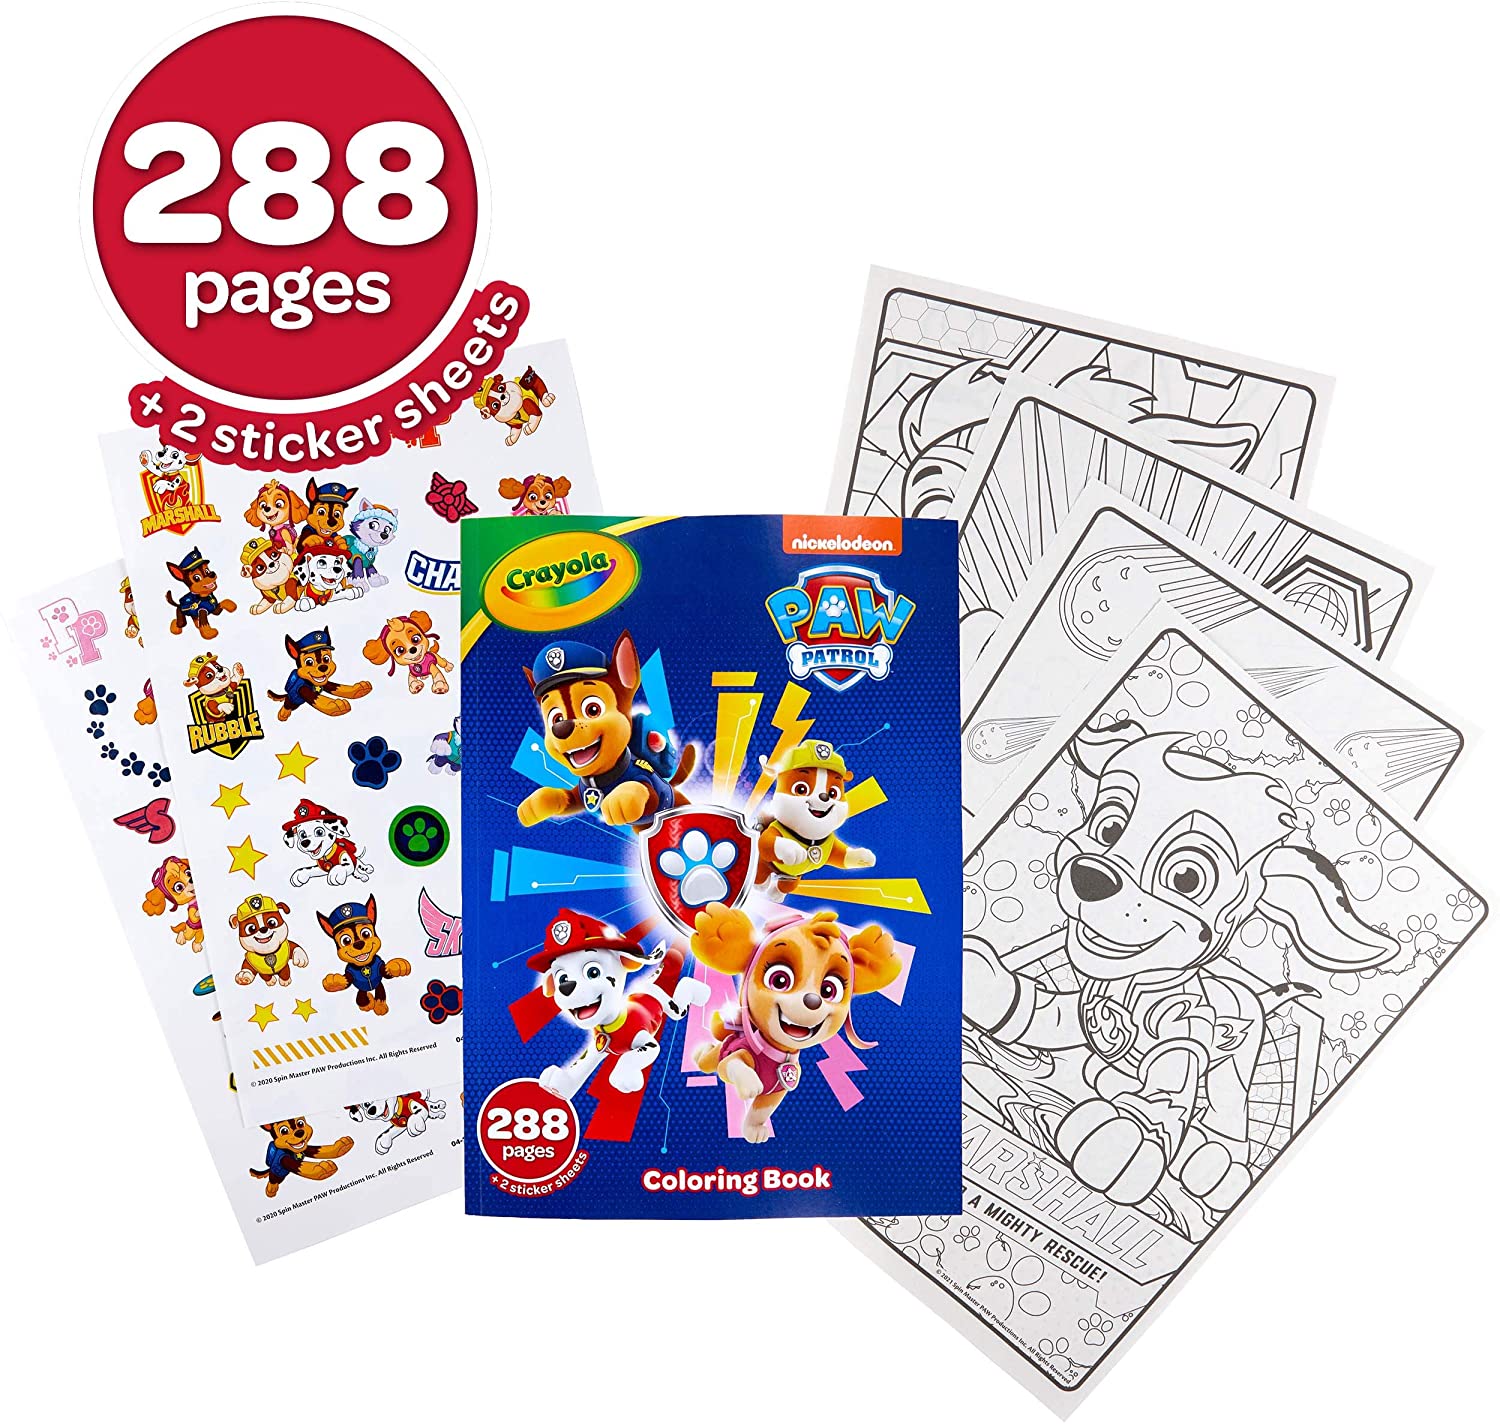 Paw Patrol Jumbo Coloring Book Brand New Nickeloden Licensed